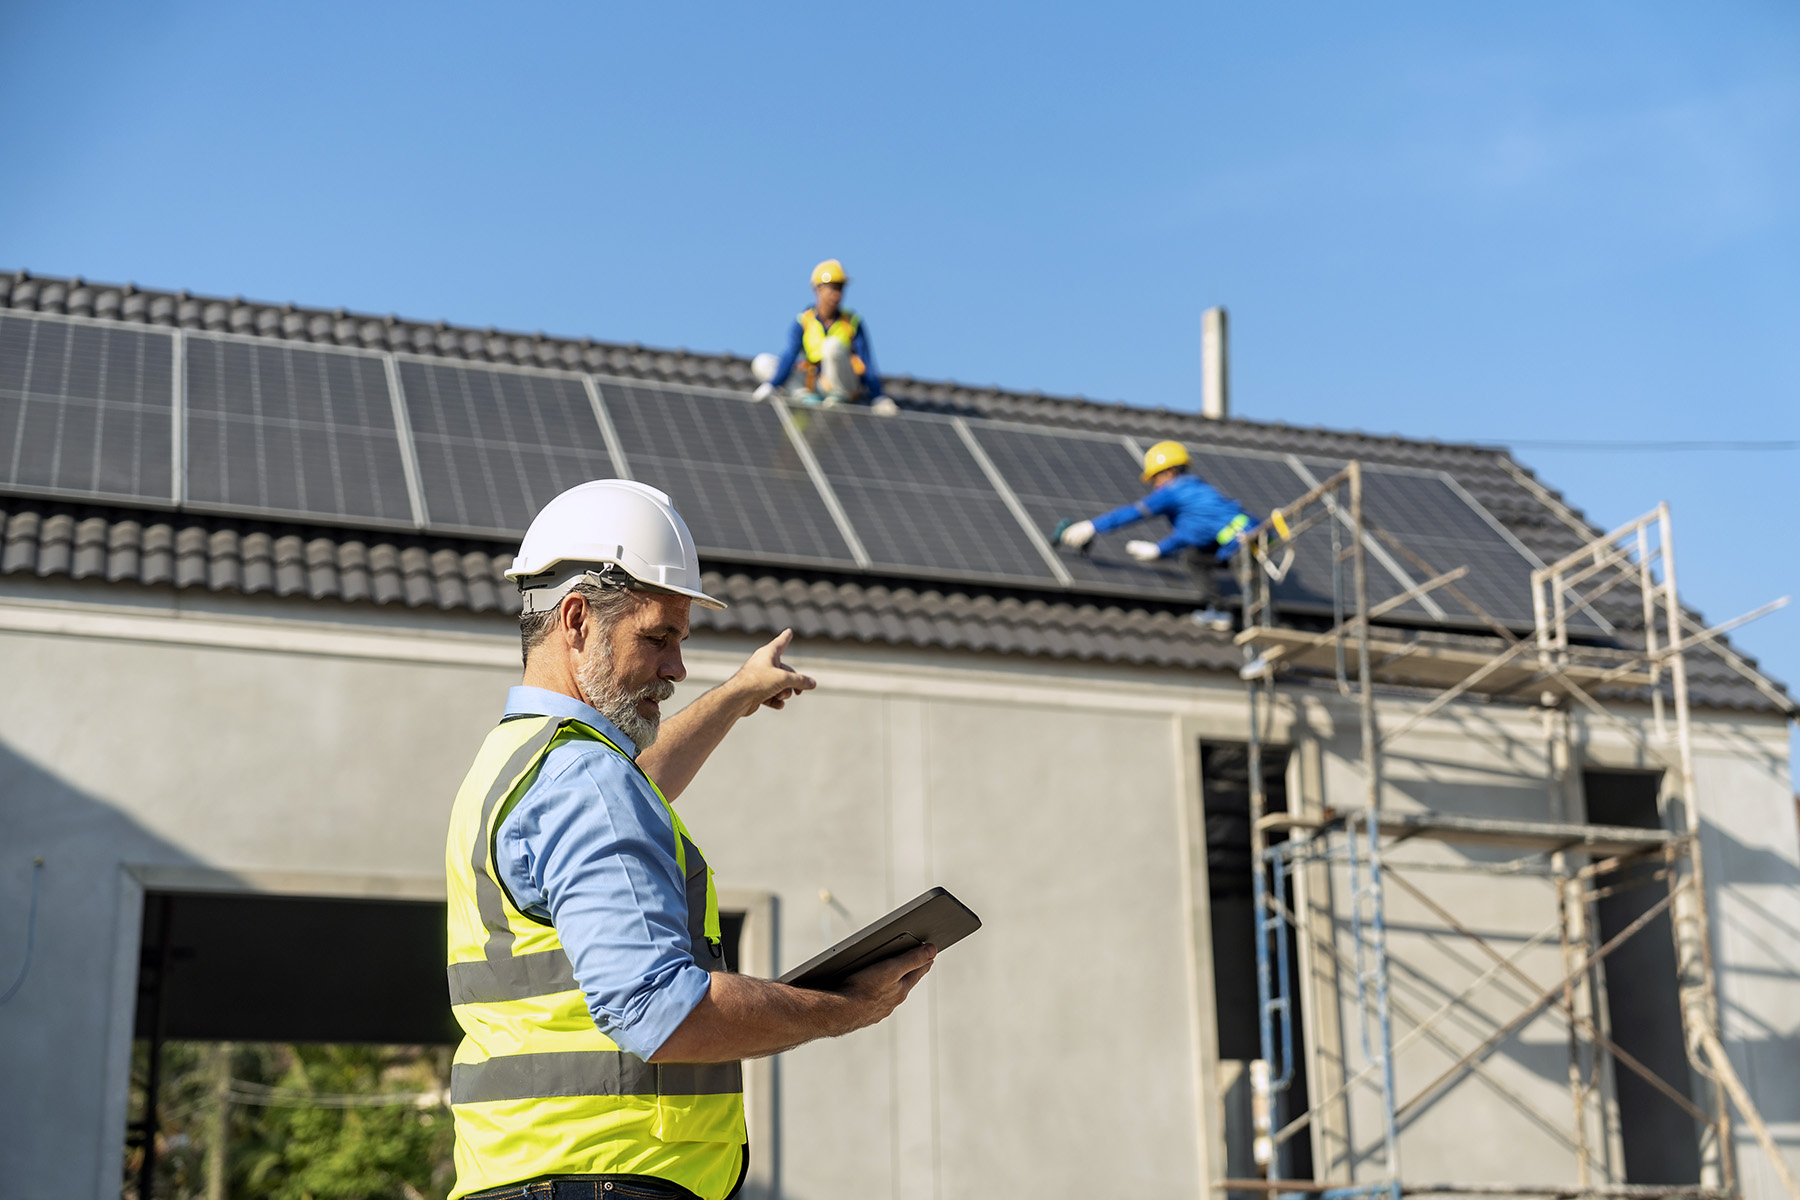 Man in hi vis vest and white safety hard hat holding a tablet while he is directing two workers working on installing solar panels on the roof of a house.